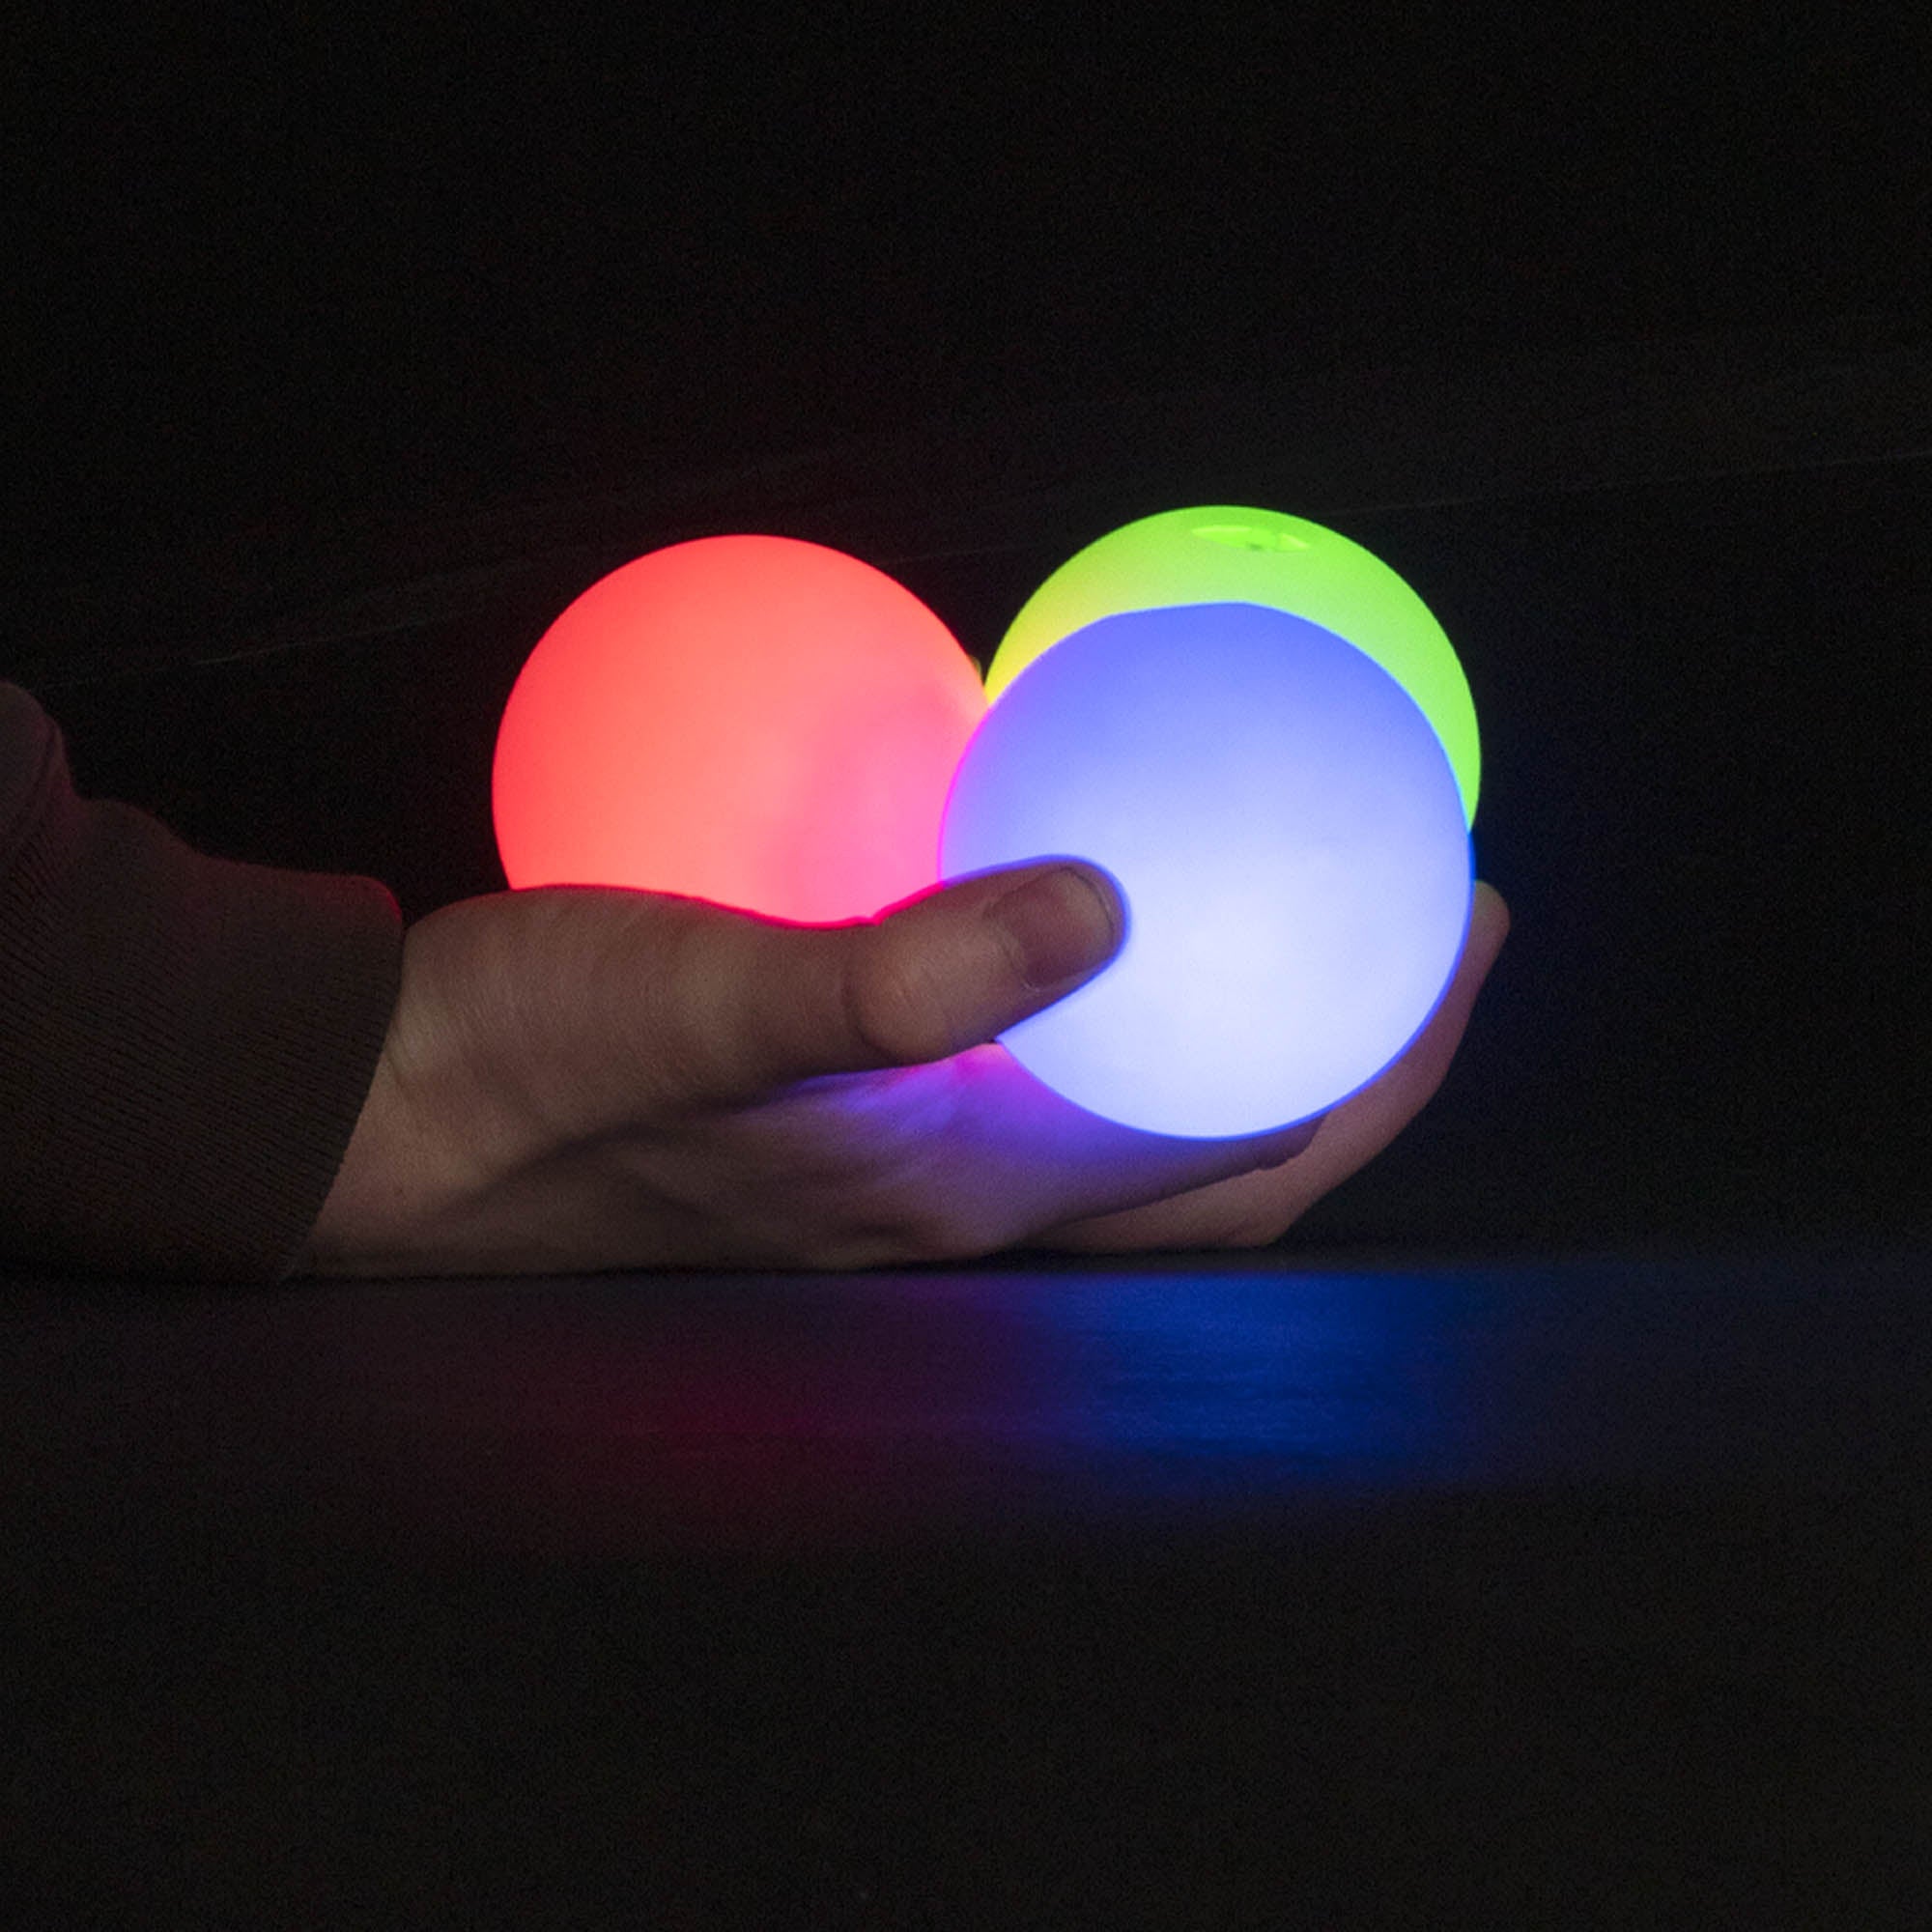 Red, blue and green glowing juggling balls in hand